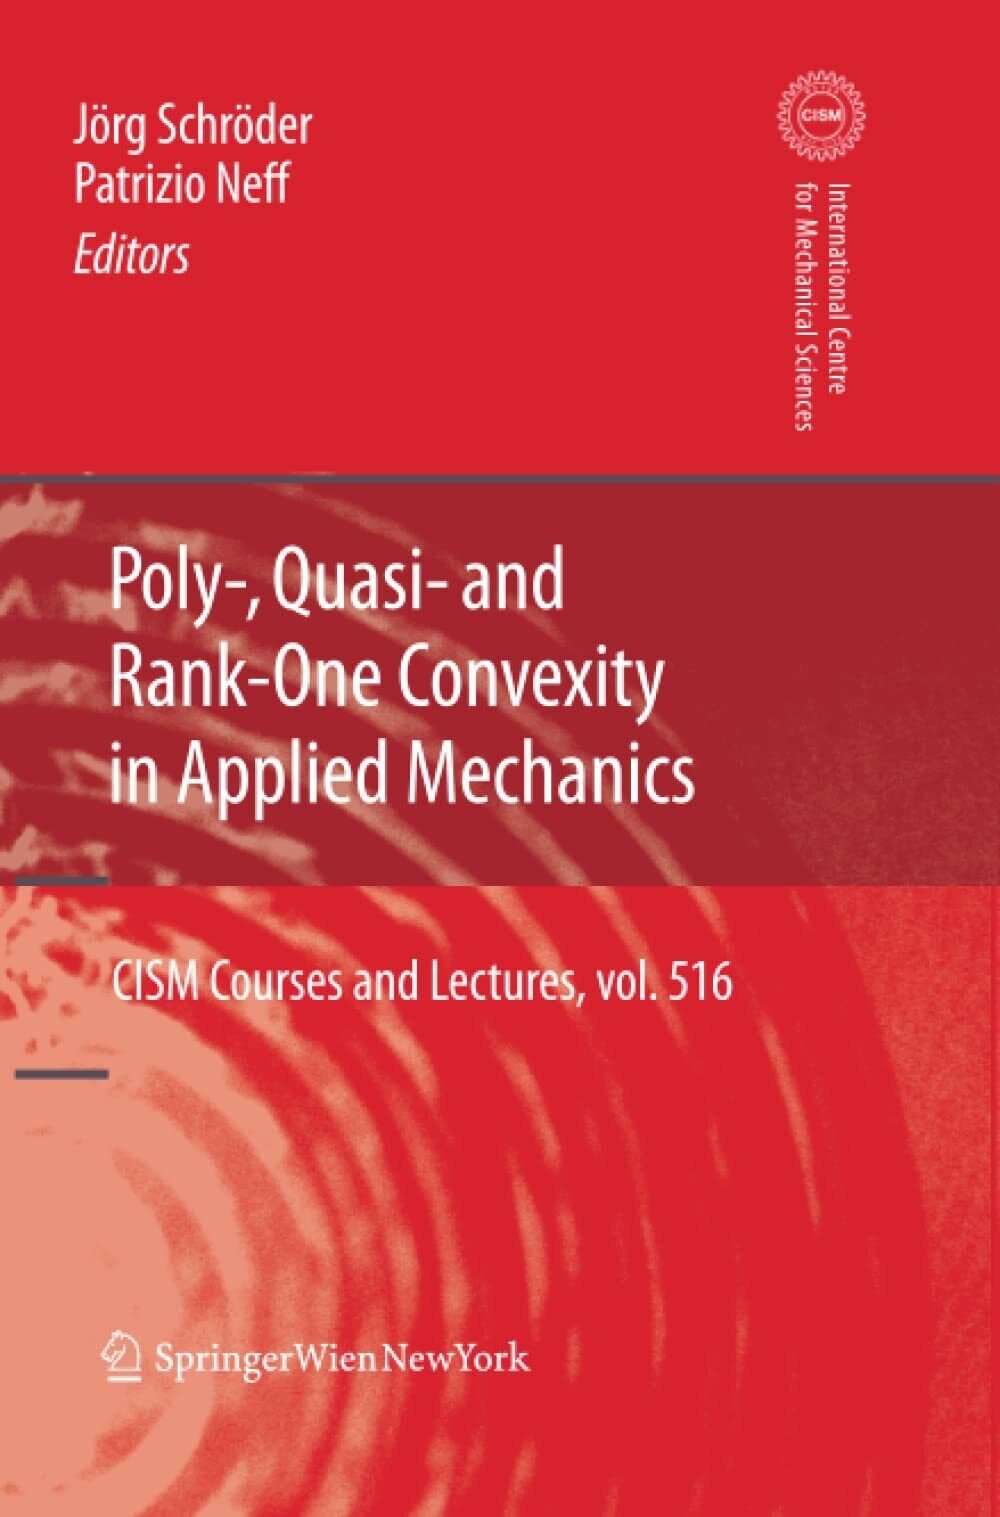 Poly-, Quasi- and Rank-One Convexity in Applied Mechanics - J?rg Schr?der - 2012